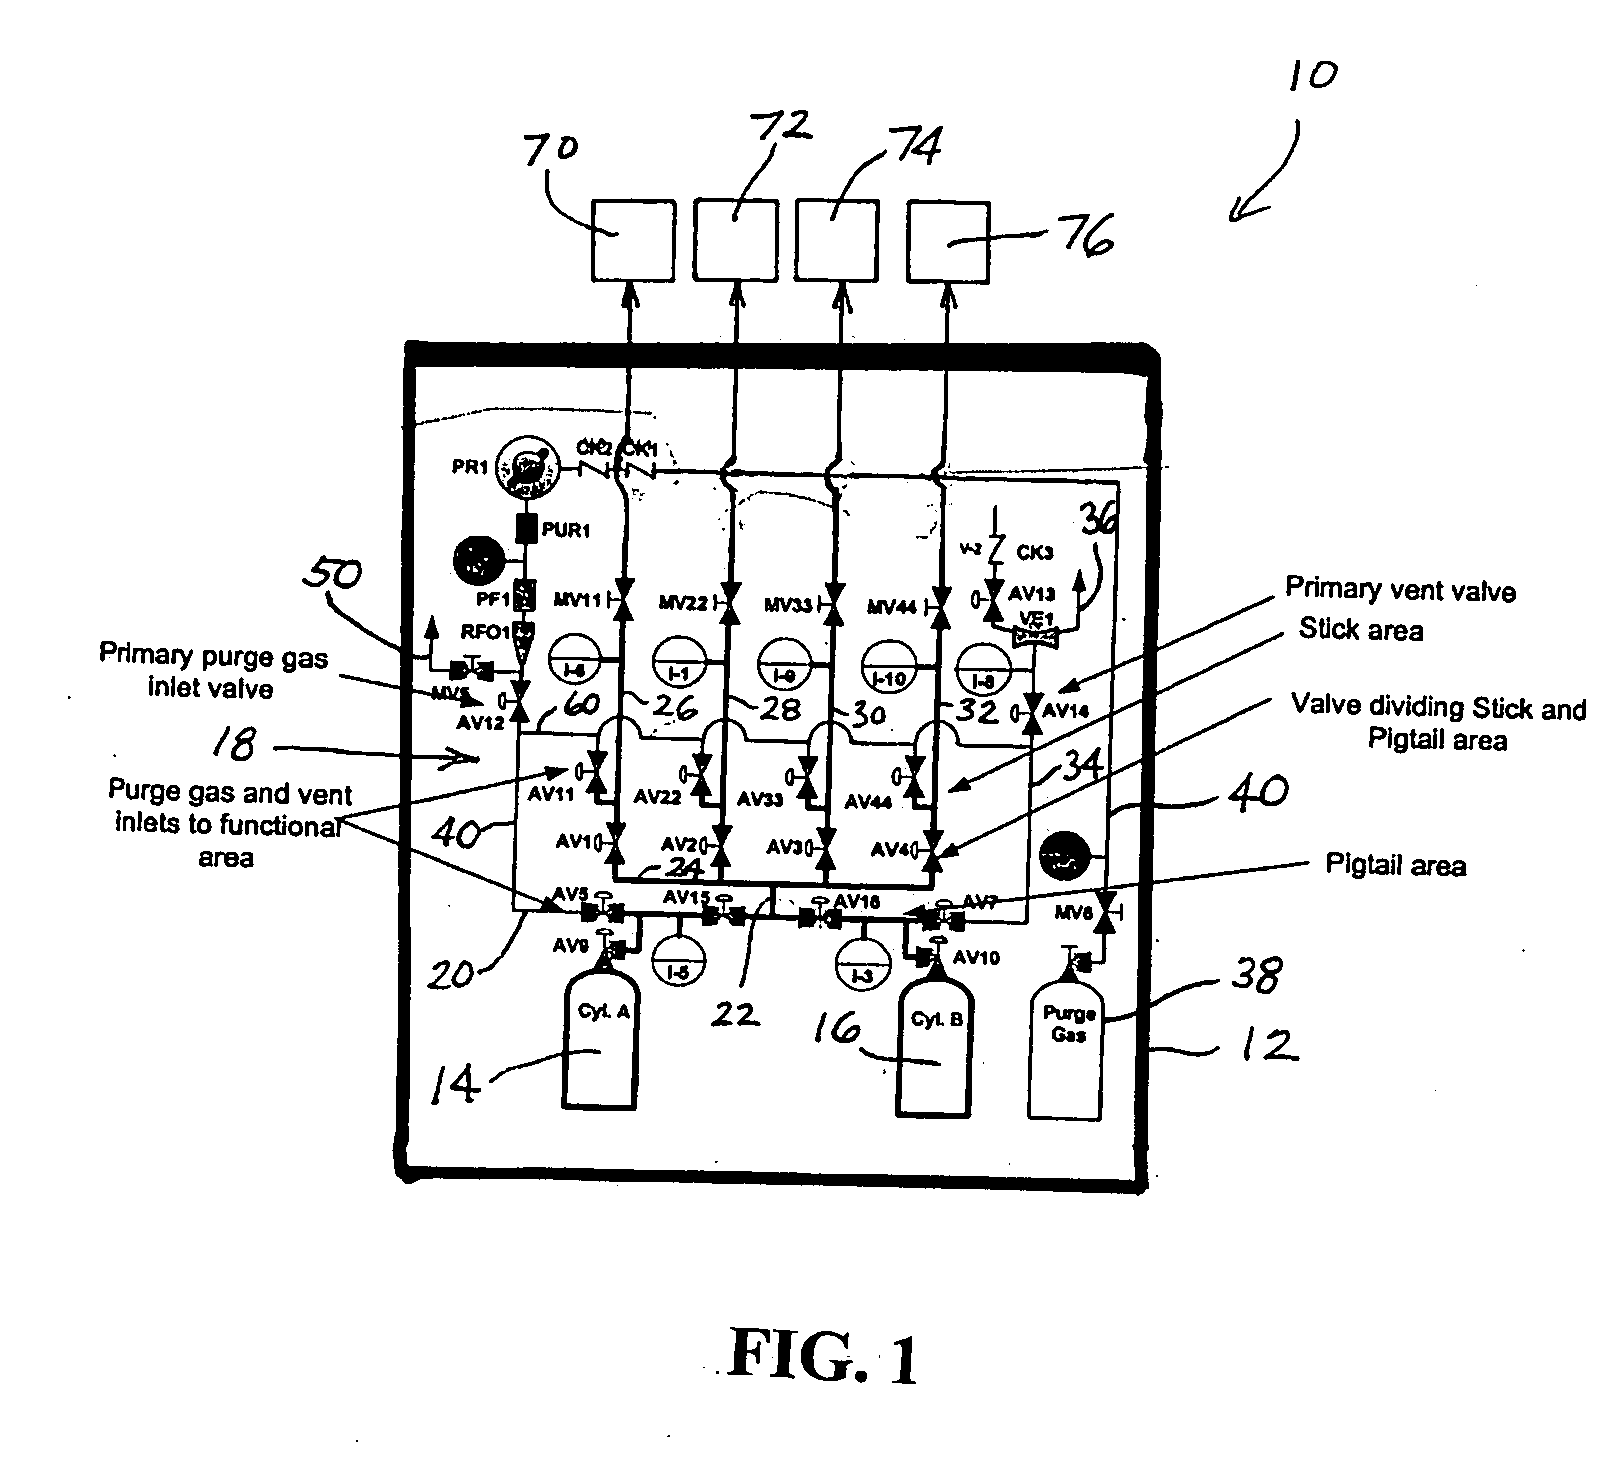 Gas delivery system with integrated valve manifold functionality for sub-atmospheric and super-atmospheric pressure applications